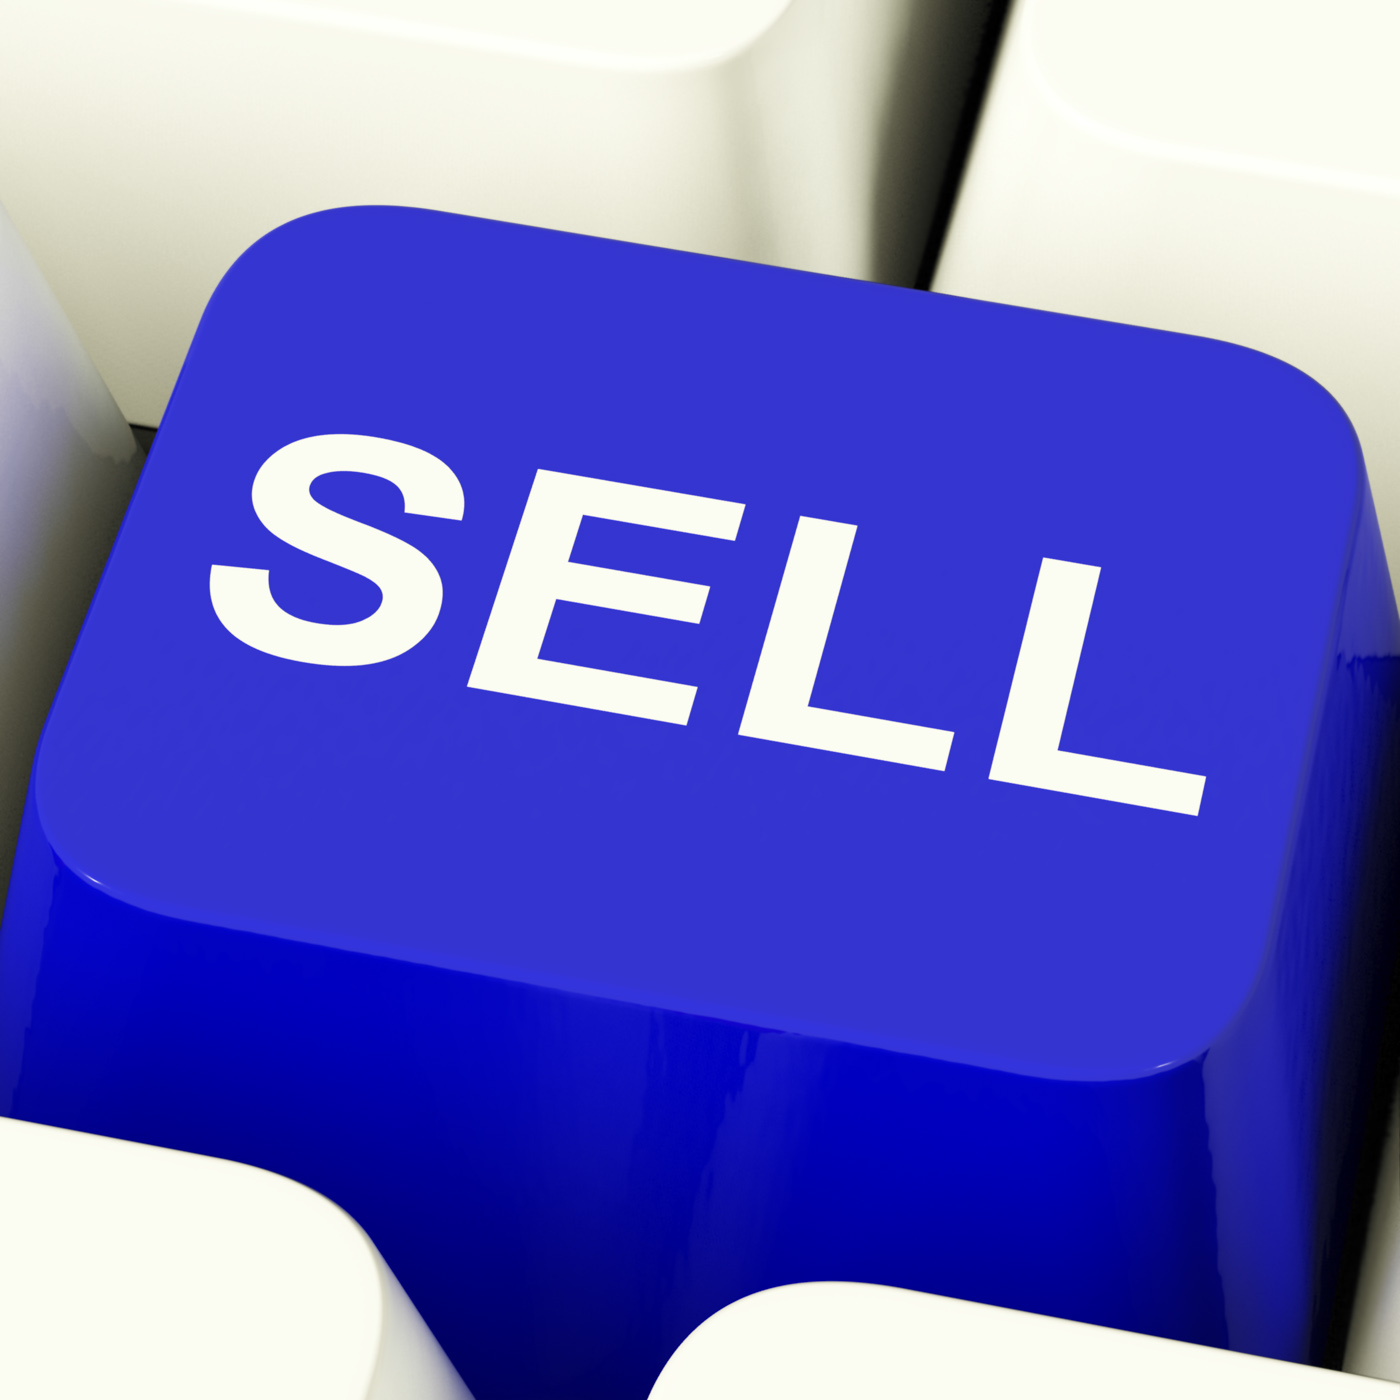 Sell computer key in blue showing sales and business photo